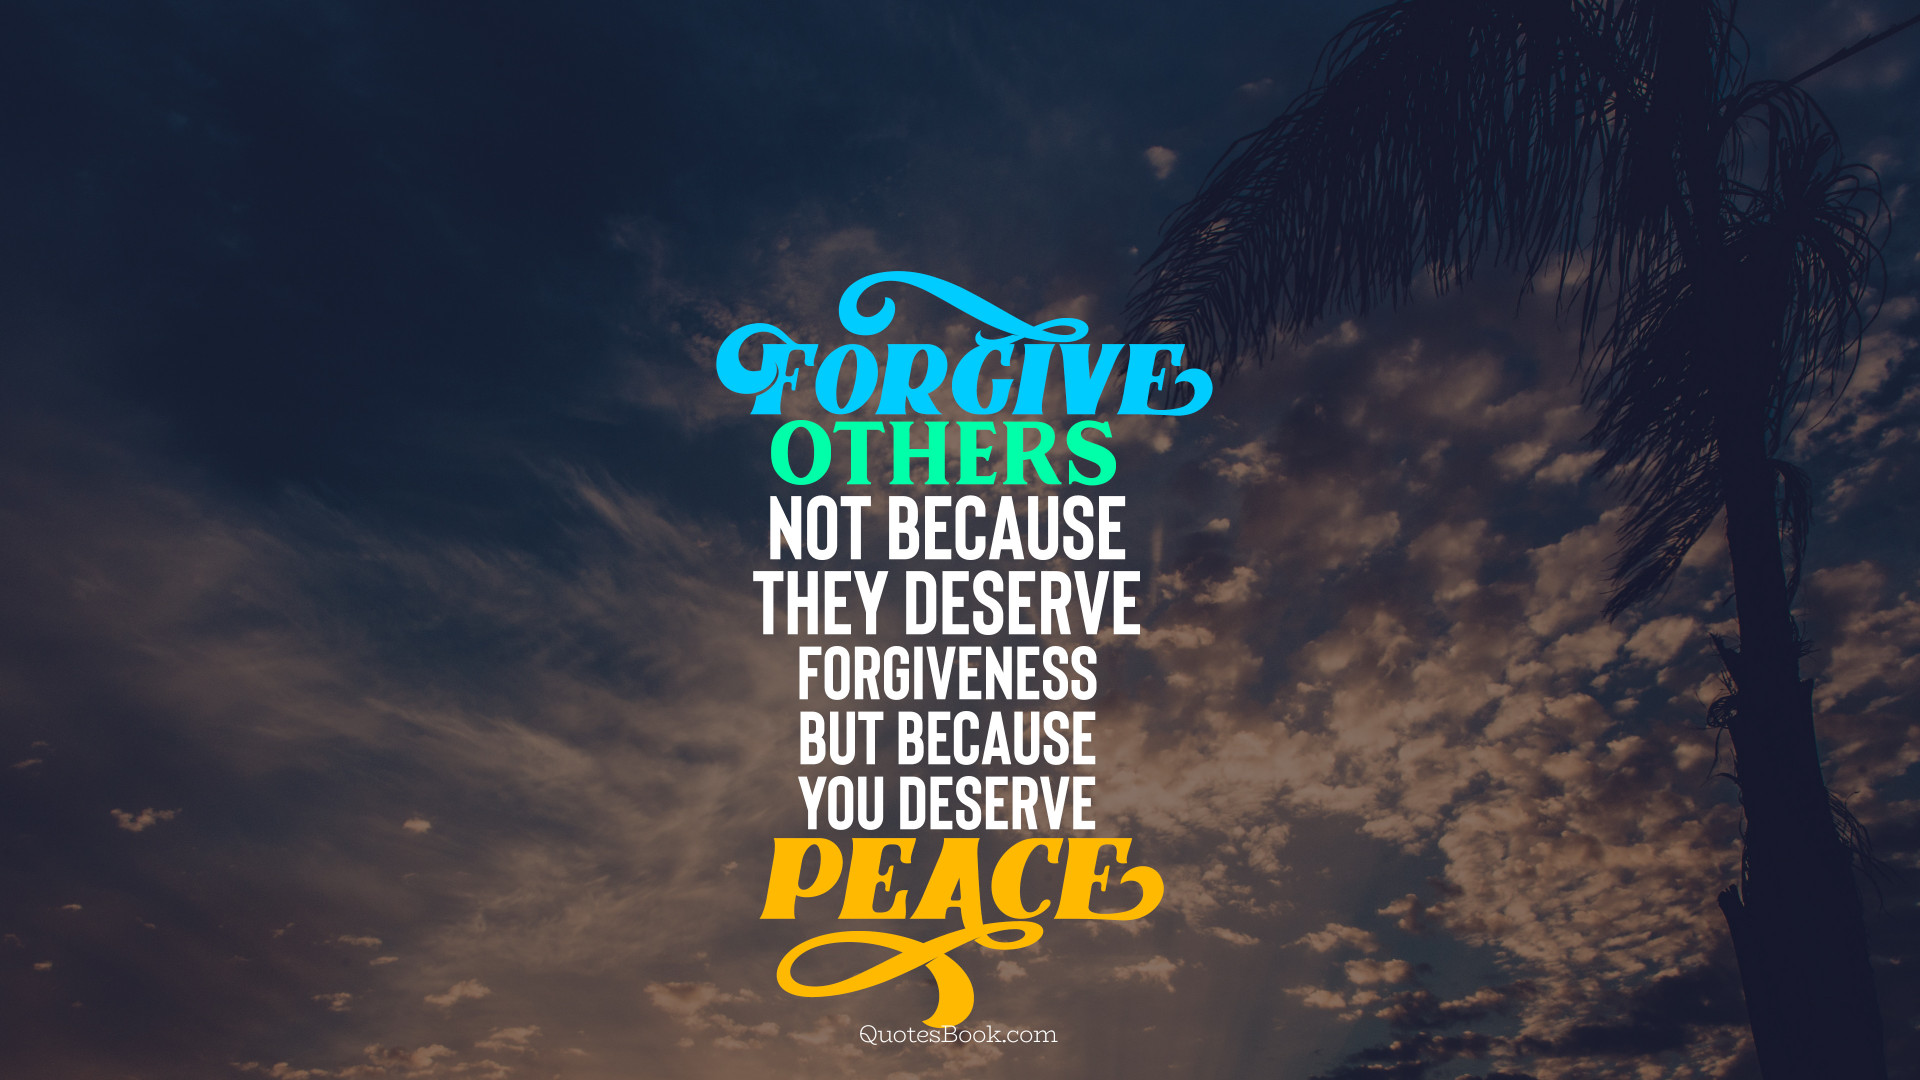 Forgive others not because they deserve forgiveness but because you